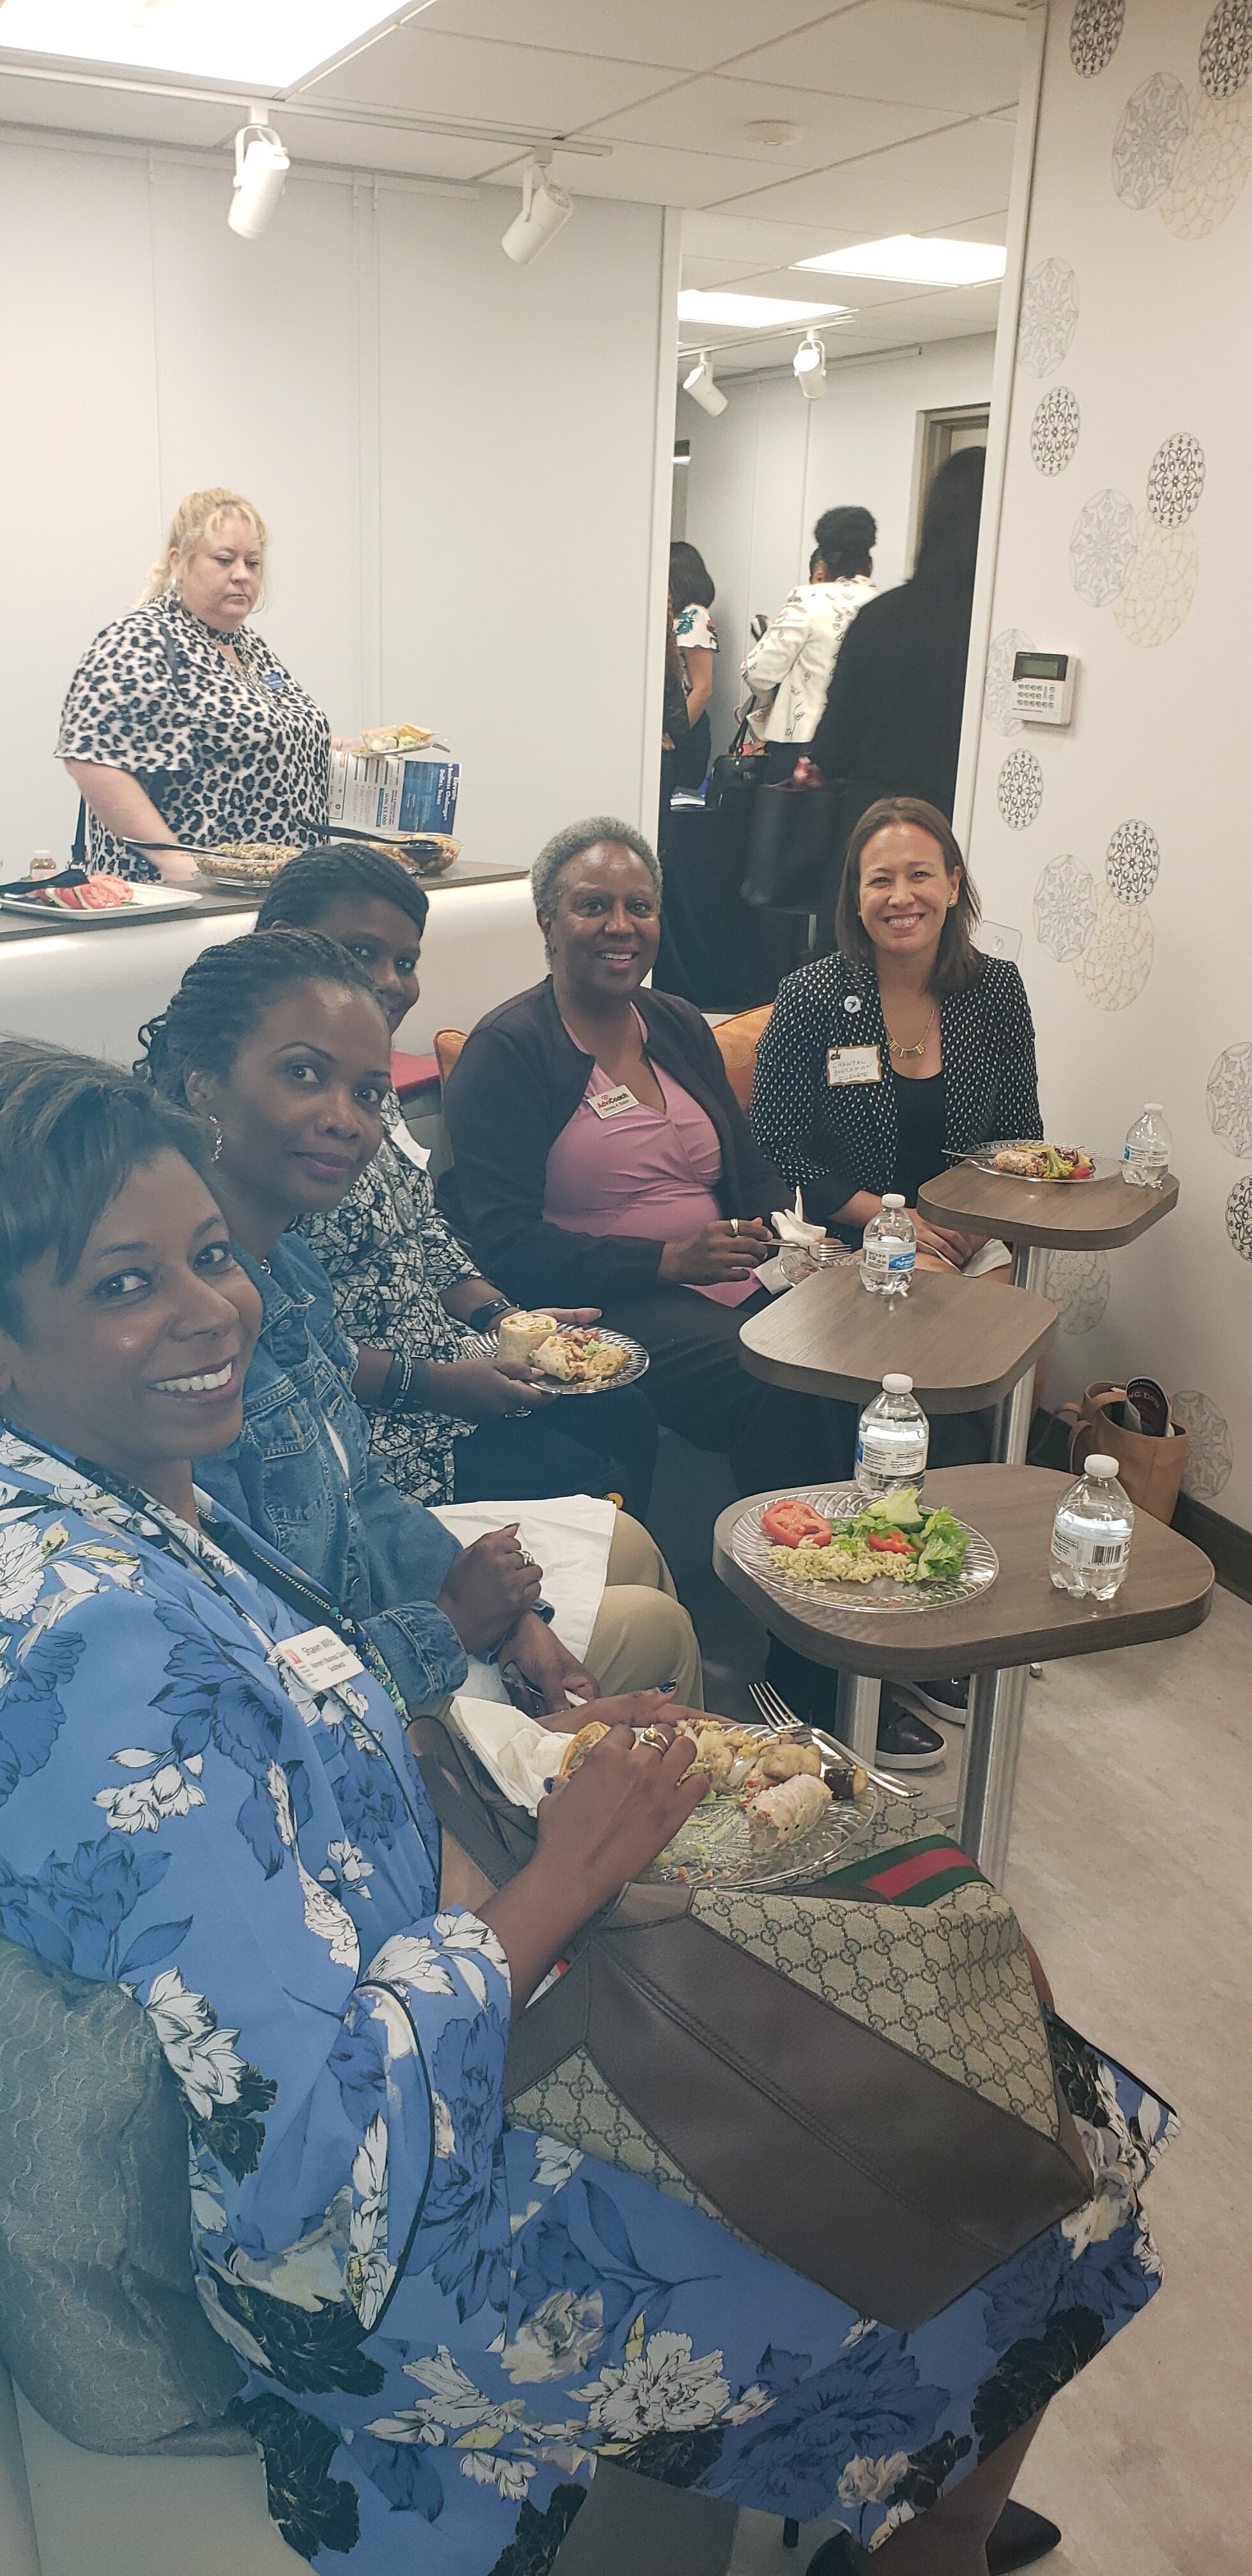 October Annual Conference 2019 - Lunch pic 2.jpg